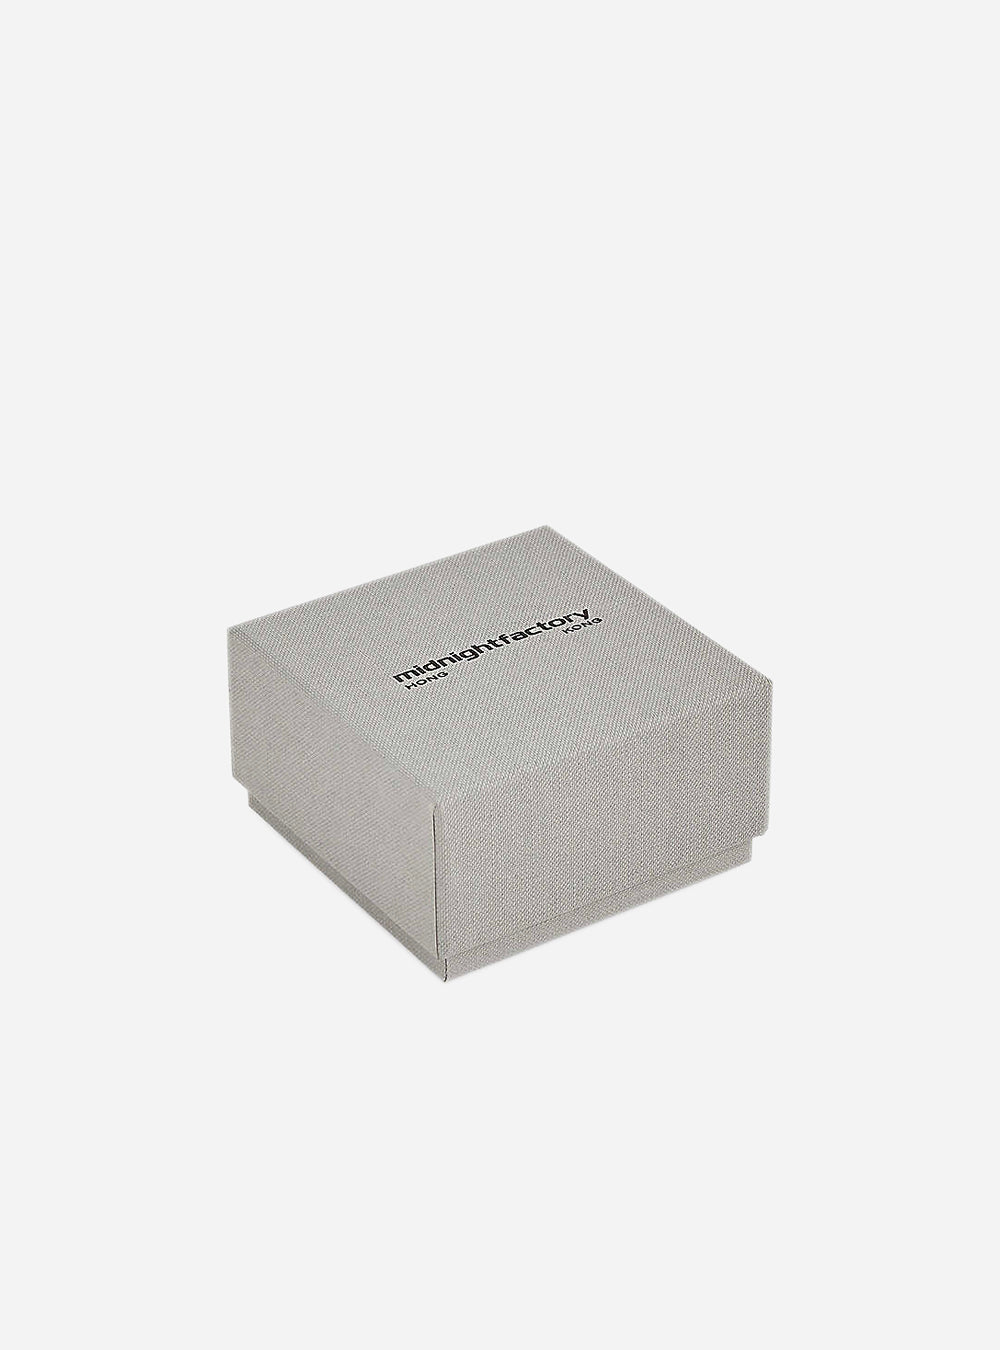 A small grey box with a MIDNIGHTFACTORY logo on it.